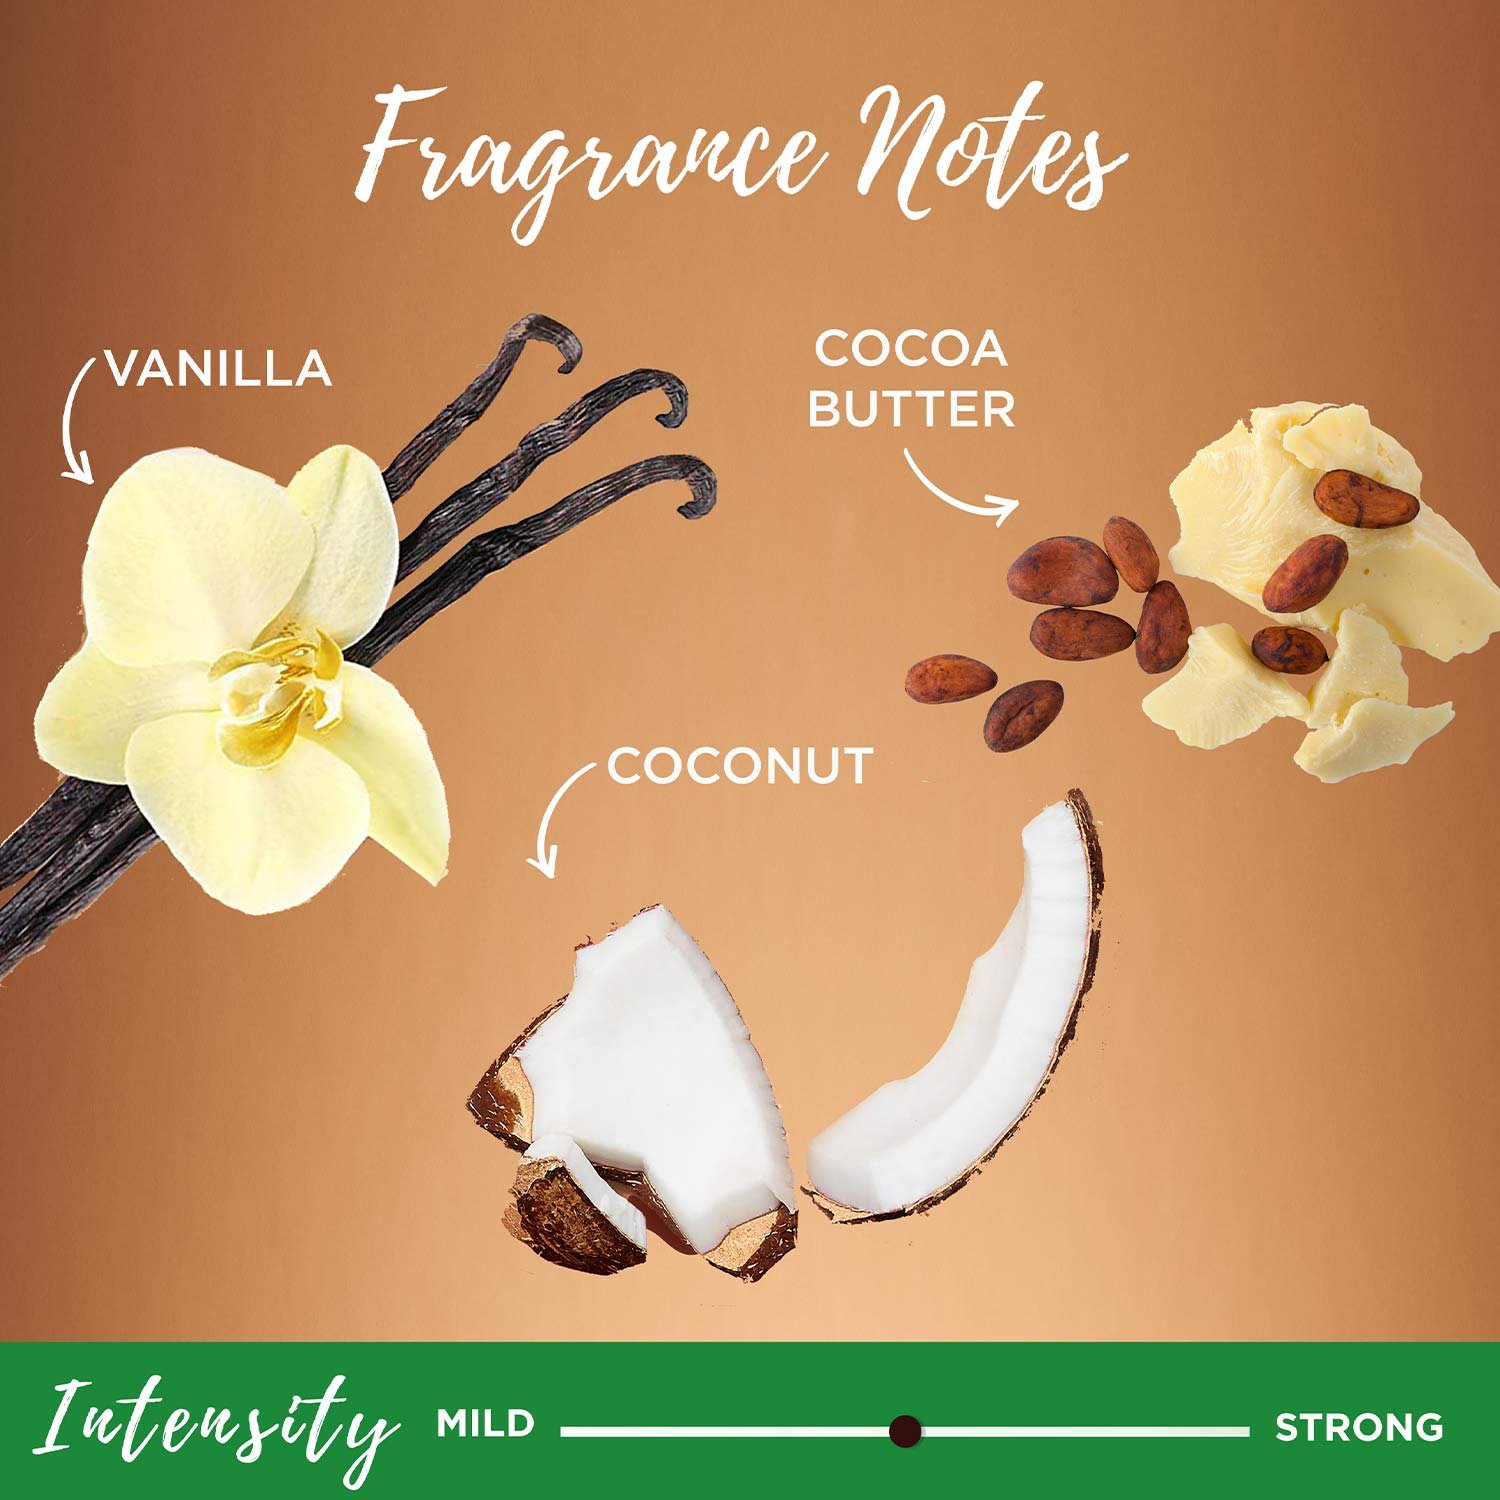 Coco Cocoa leave-in conditioner fragrance notes